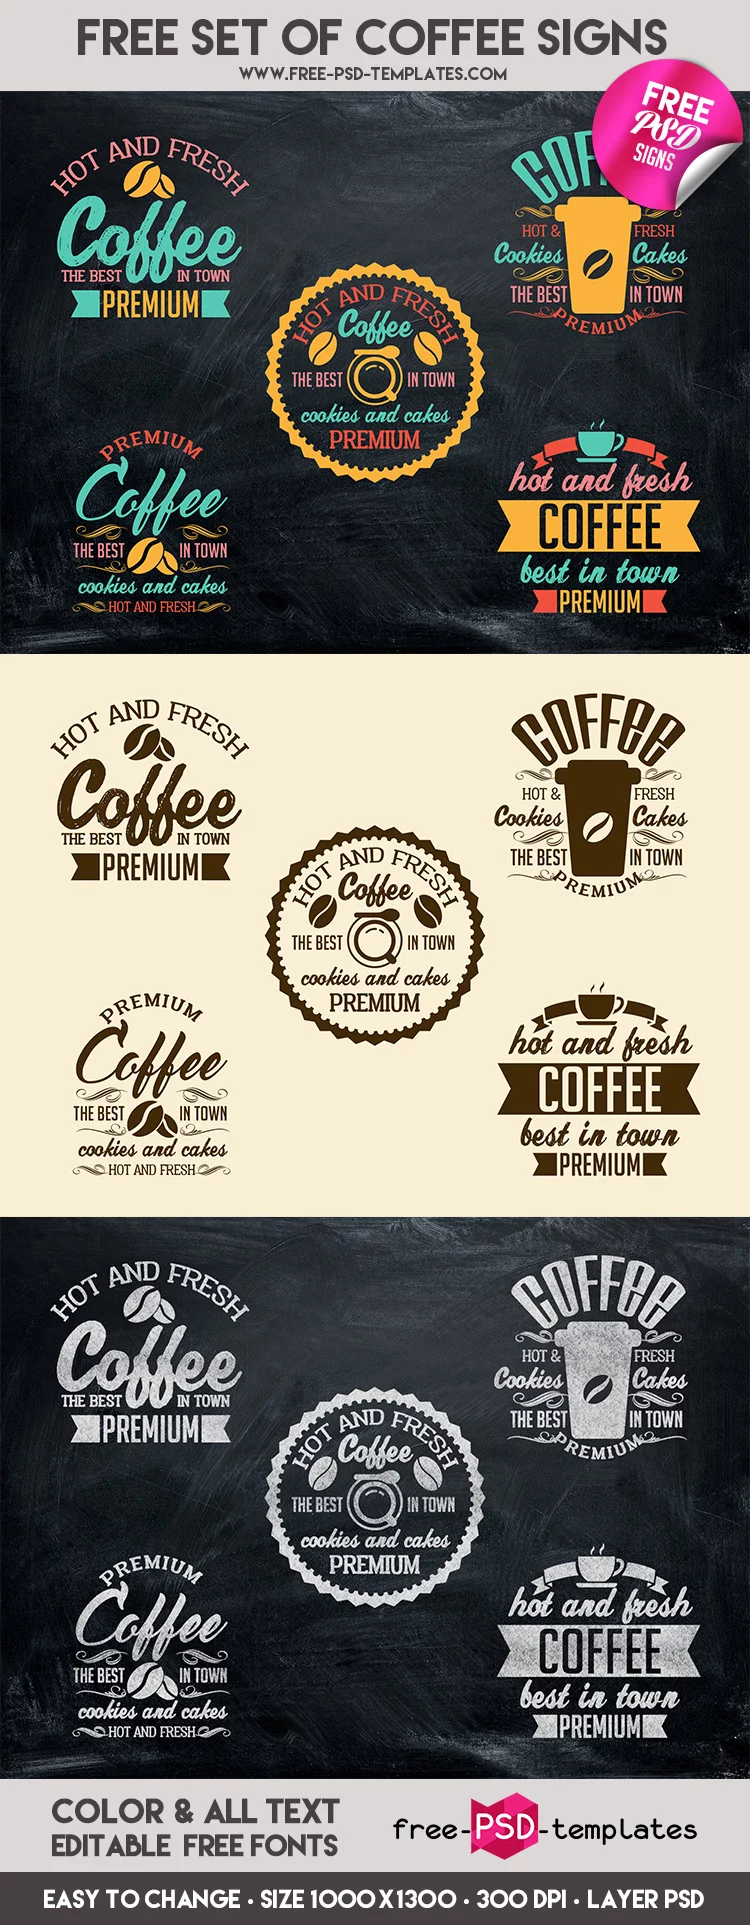 Preview_Set_Of_Coffee_Signs